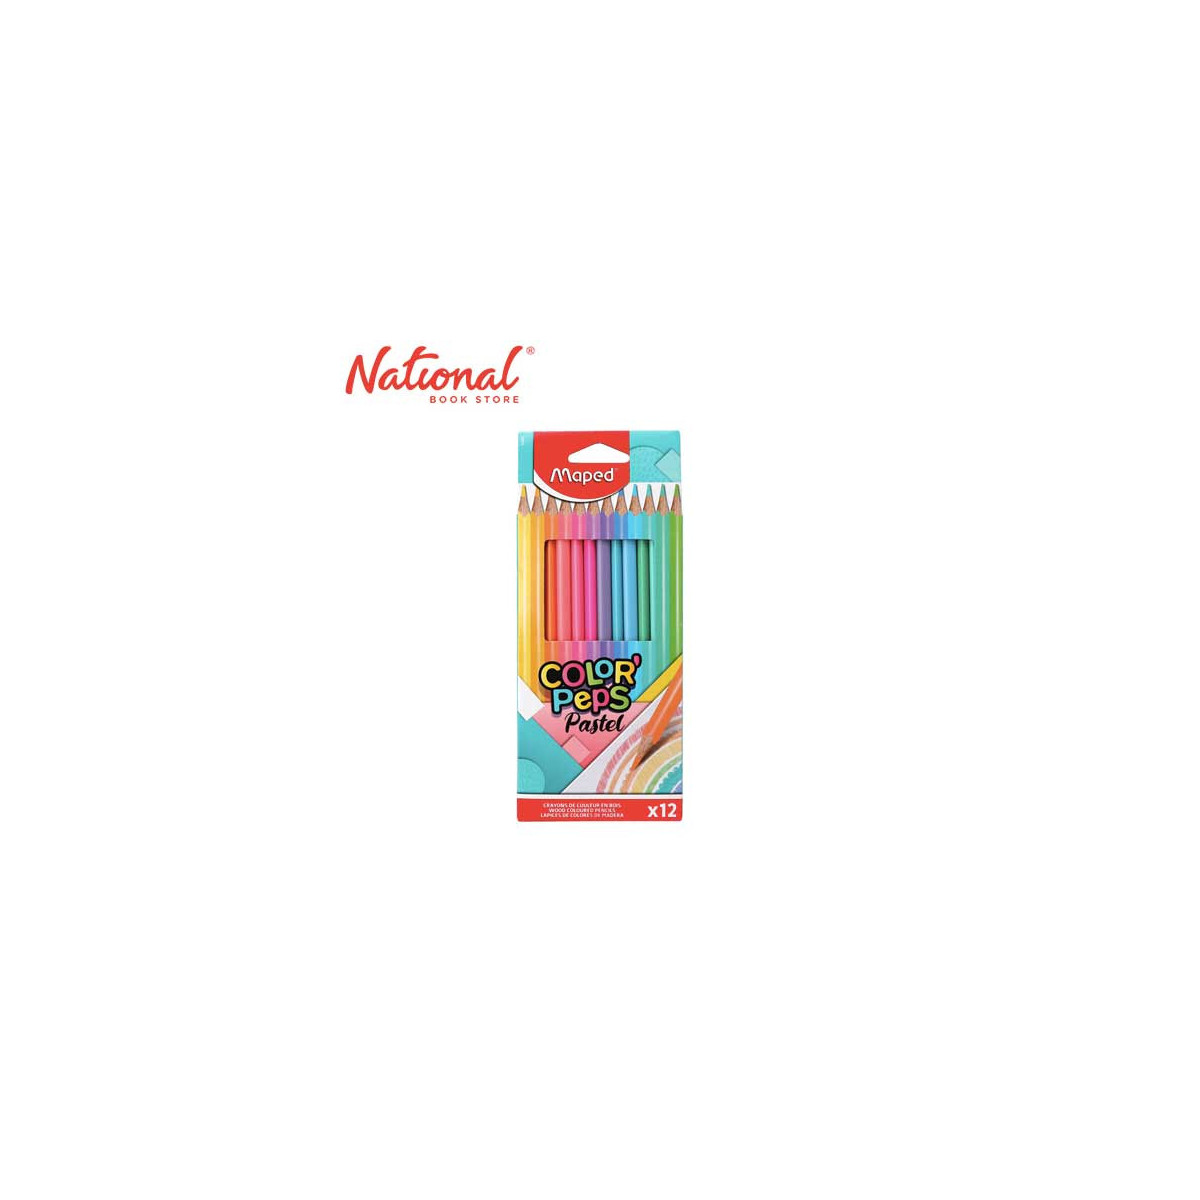 Maped Pastel Colored Pencils 12 CT 832069 - Art Supplies - School Supplies